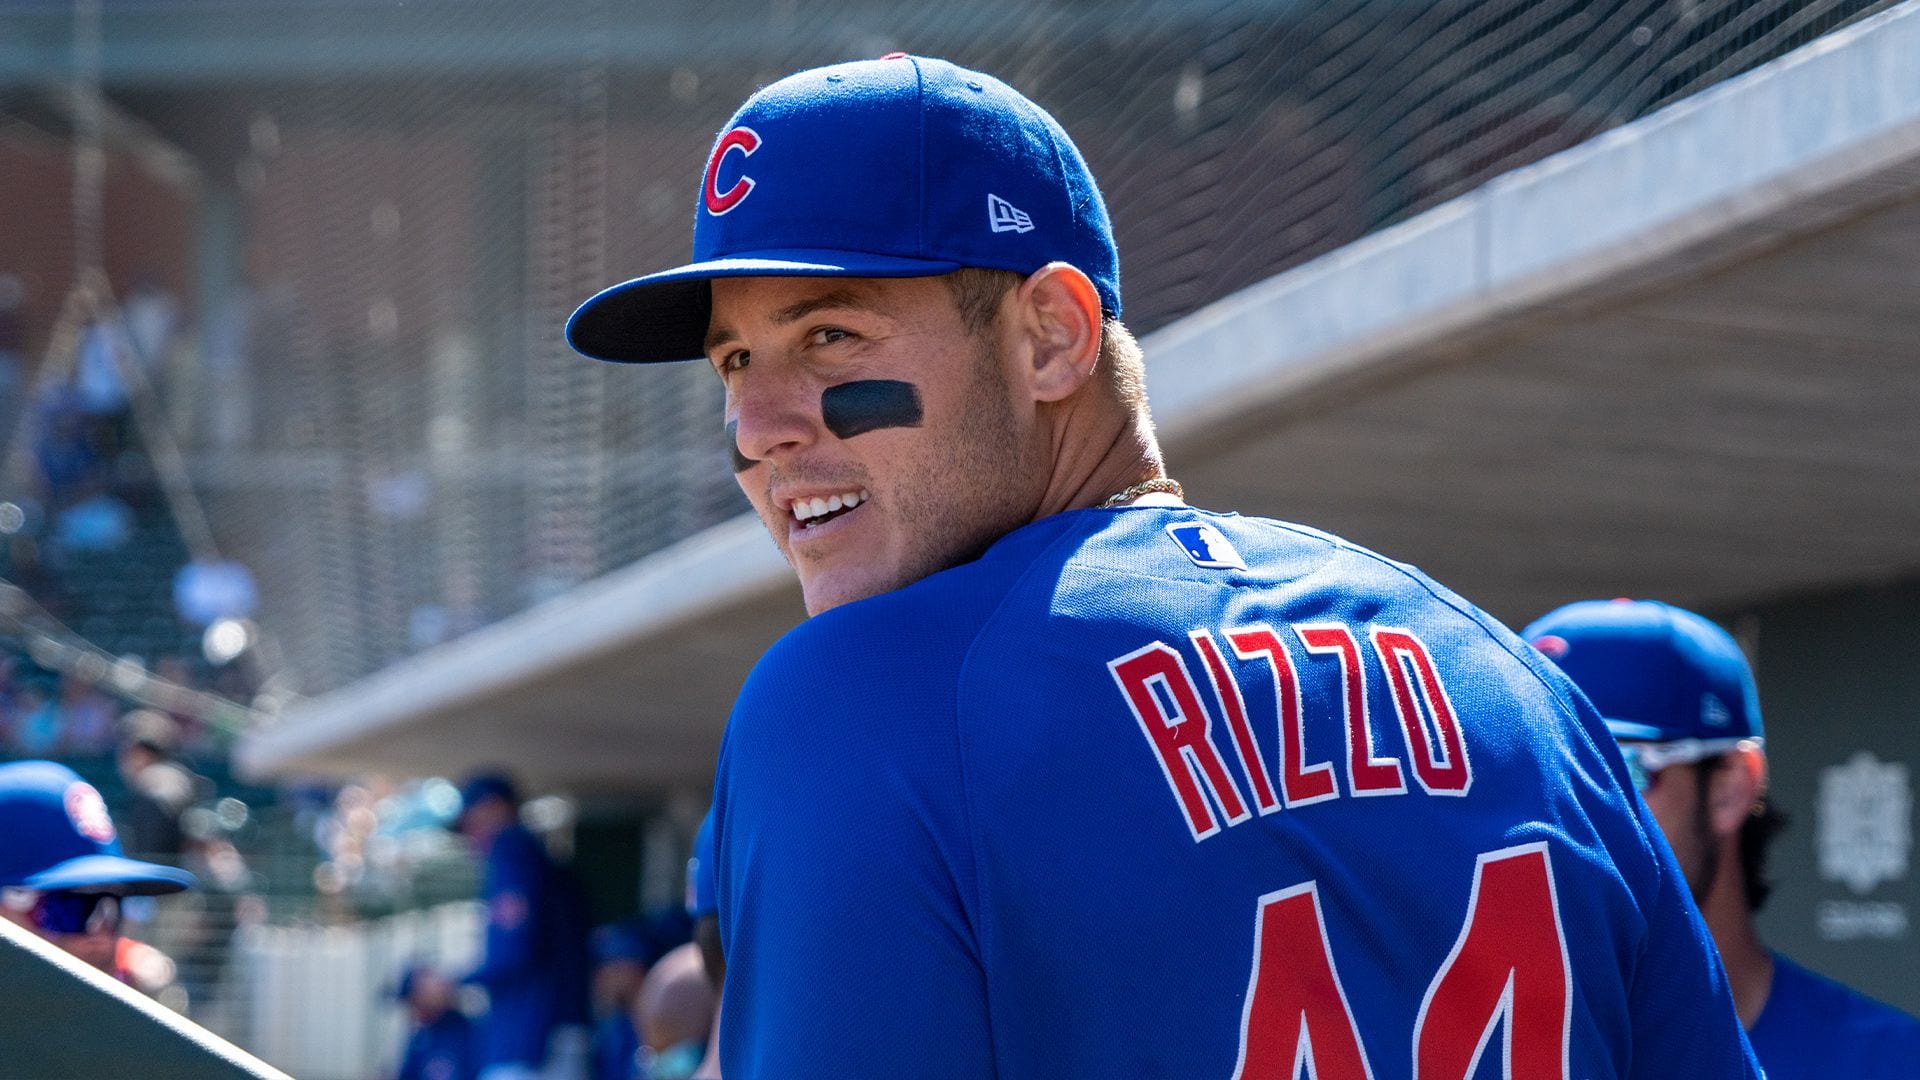 Twitter Reacts to Anthony Rizzo's New Blonde Hair - wide 9